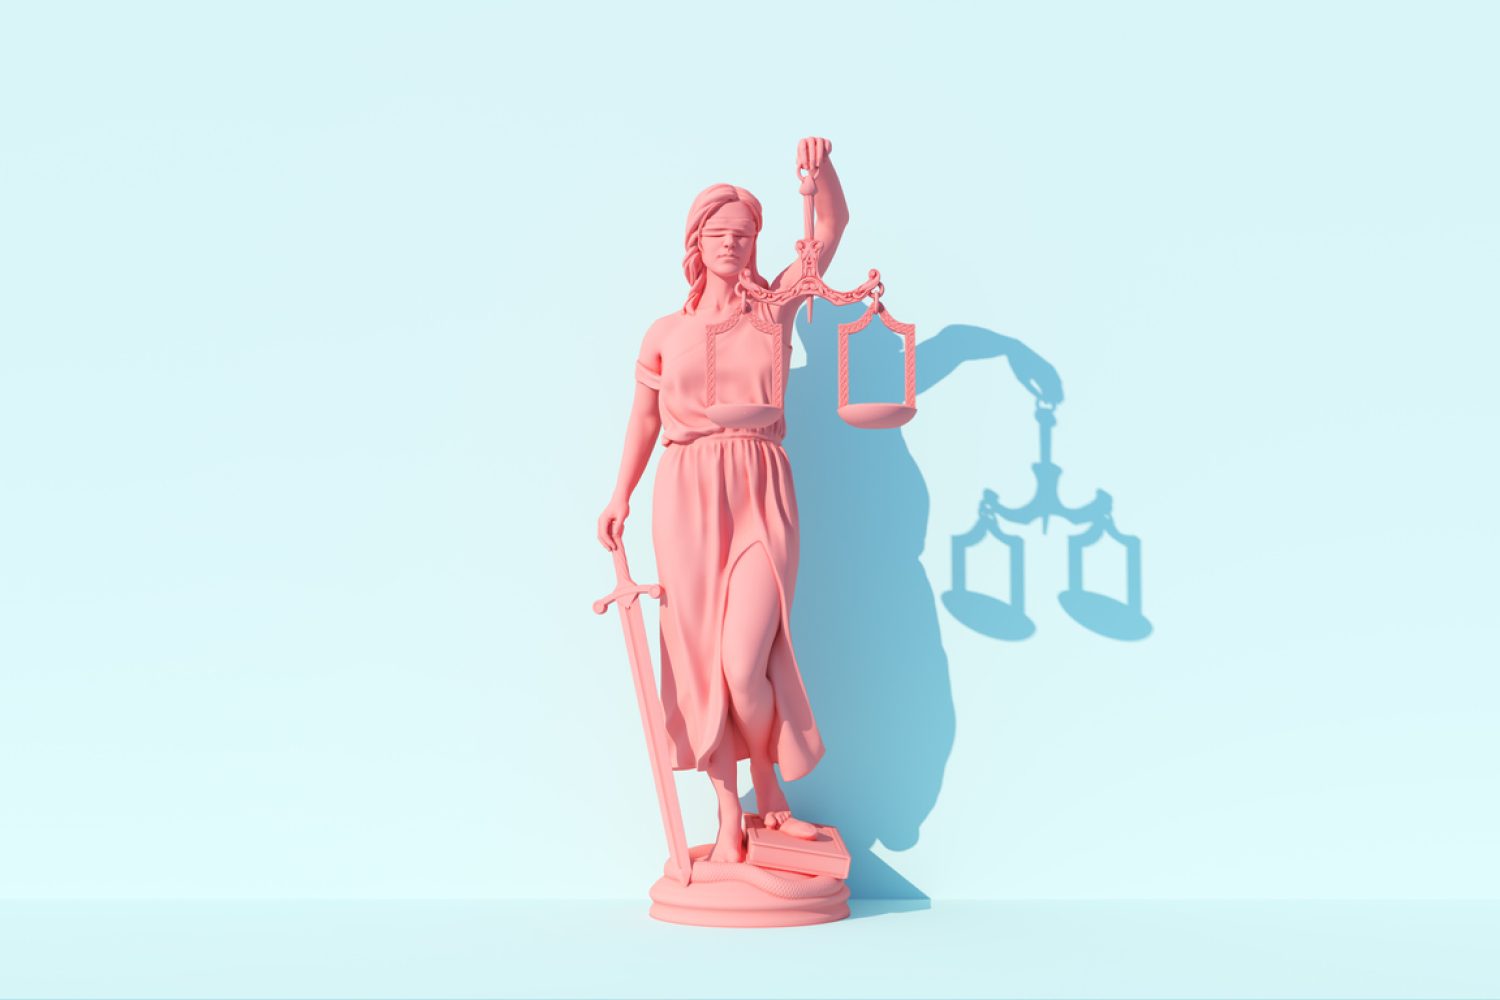 Pink Lady Justice Statue Personification of the Judicial System Traditional Protection and Balance Moral Force for Good and Lawfare Pastel Blue Background 3d illustration render